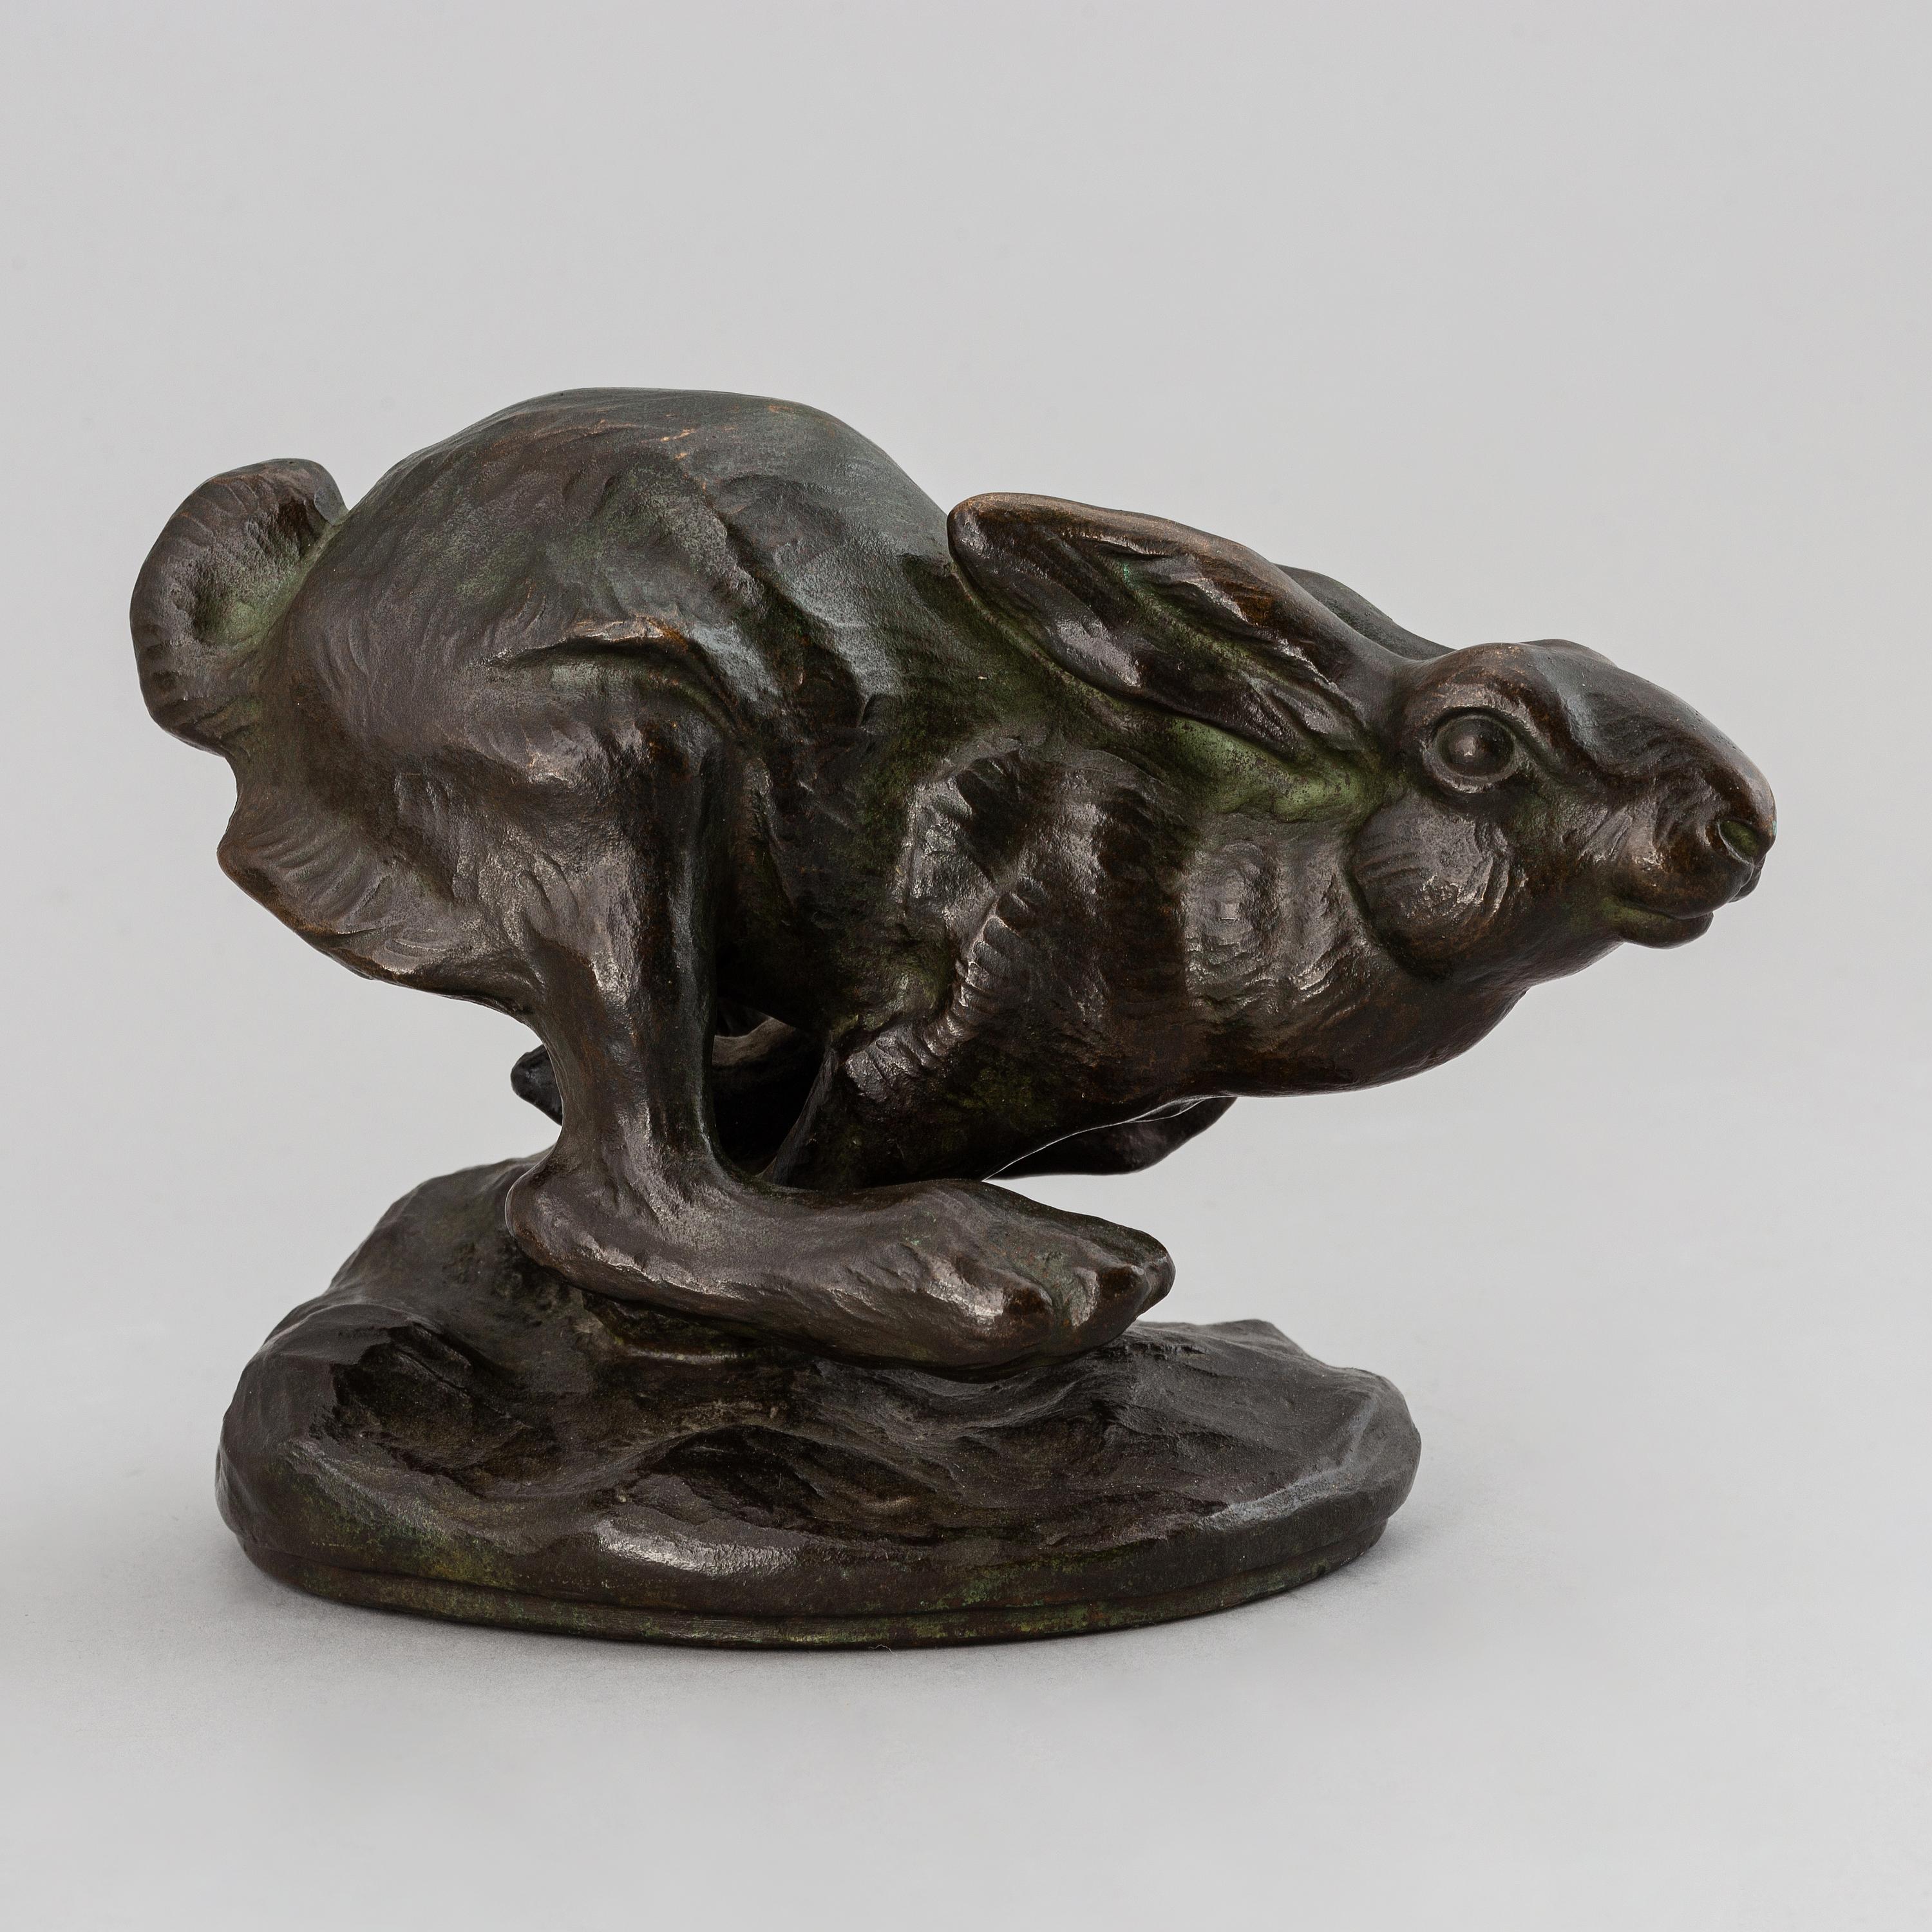 Art Nouveau Sculpture of a Hare by Knud Max Möller